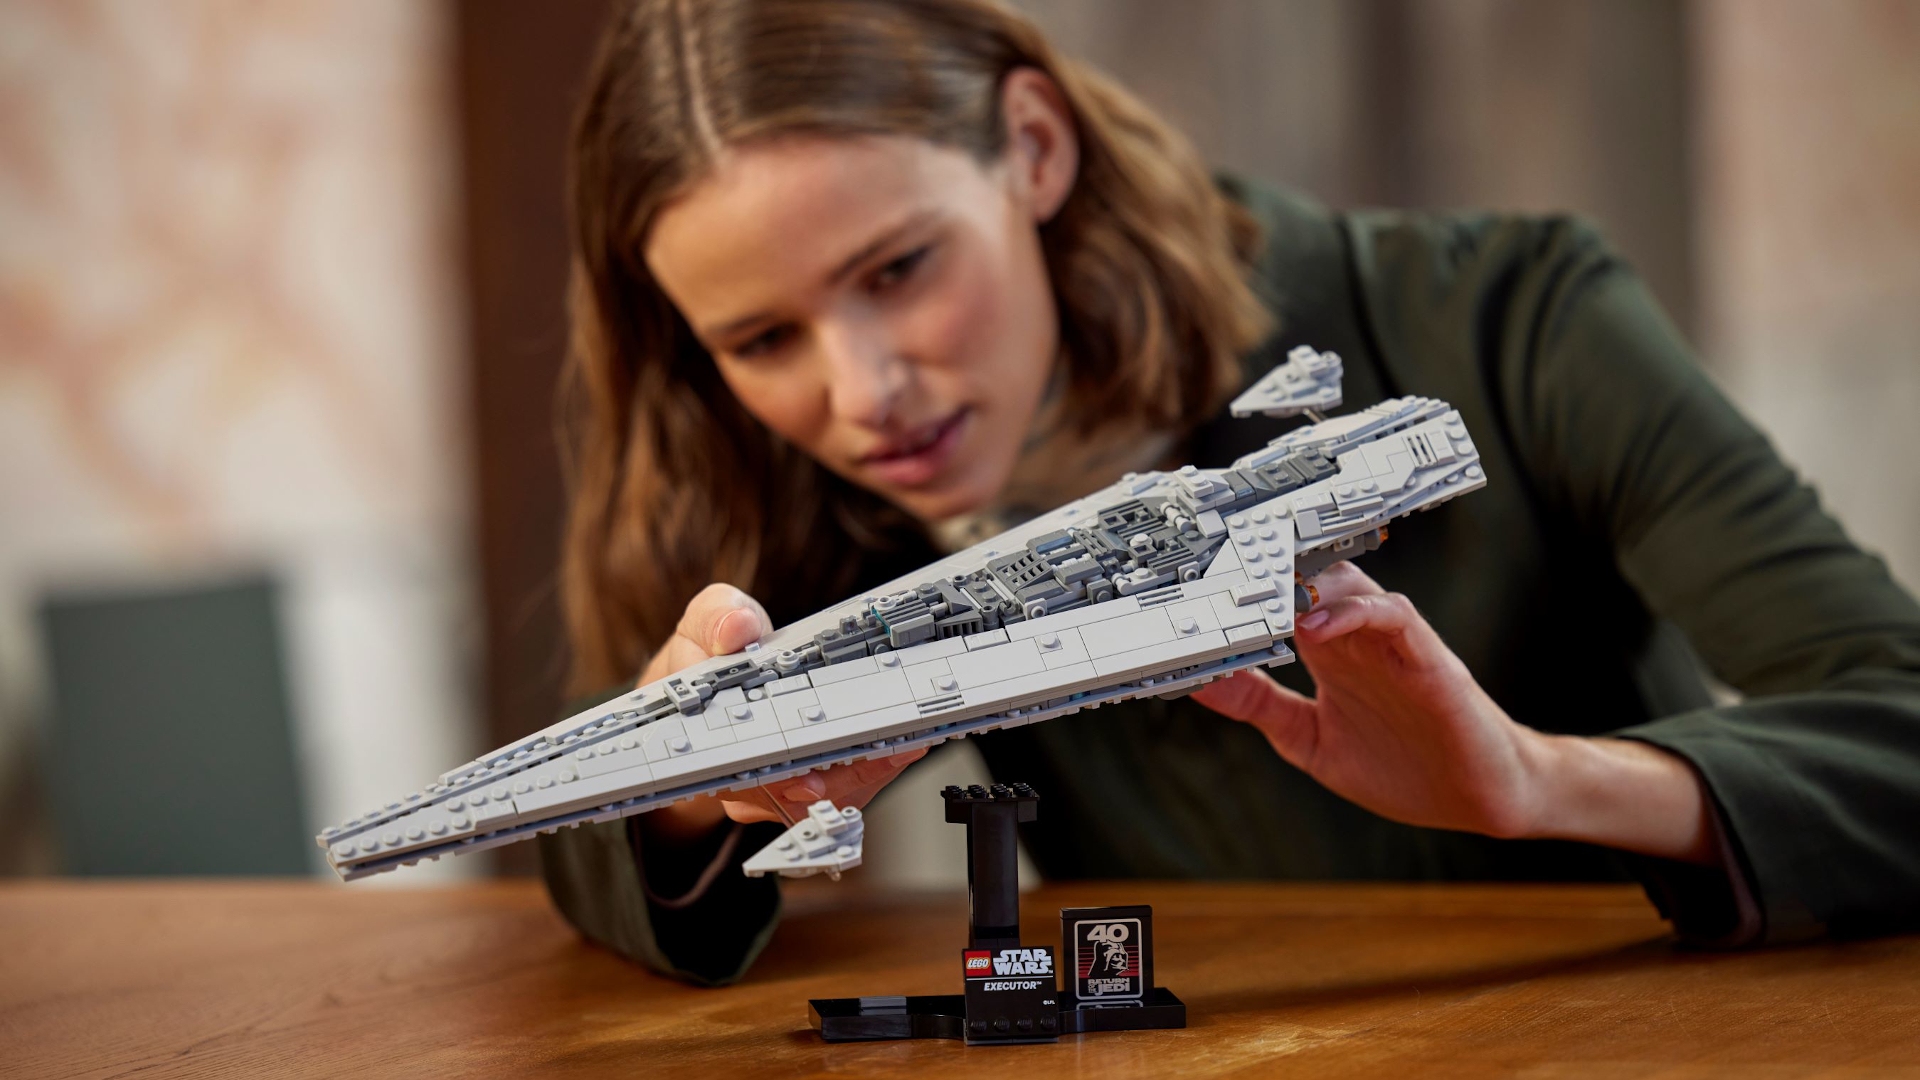 Lego has revealed a new Executor Super Star Destroyer set and it looks  fantastic